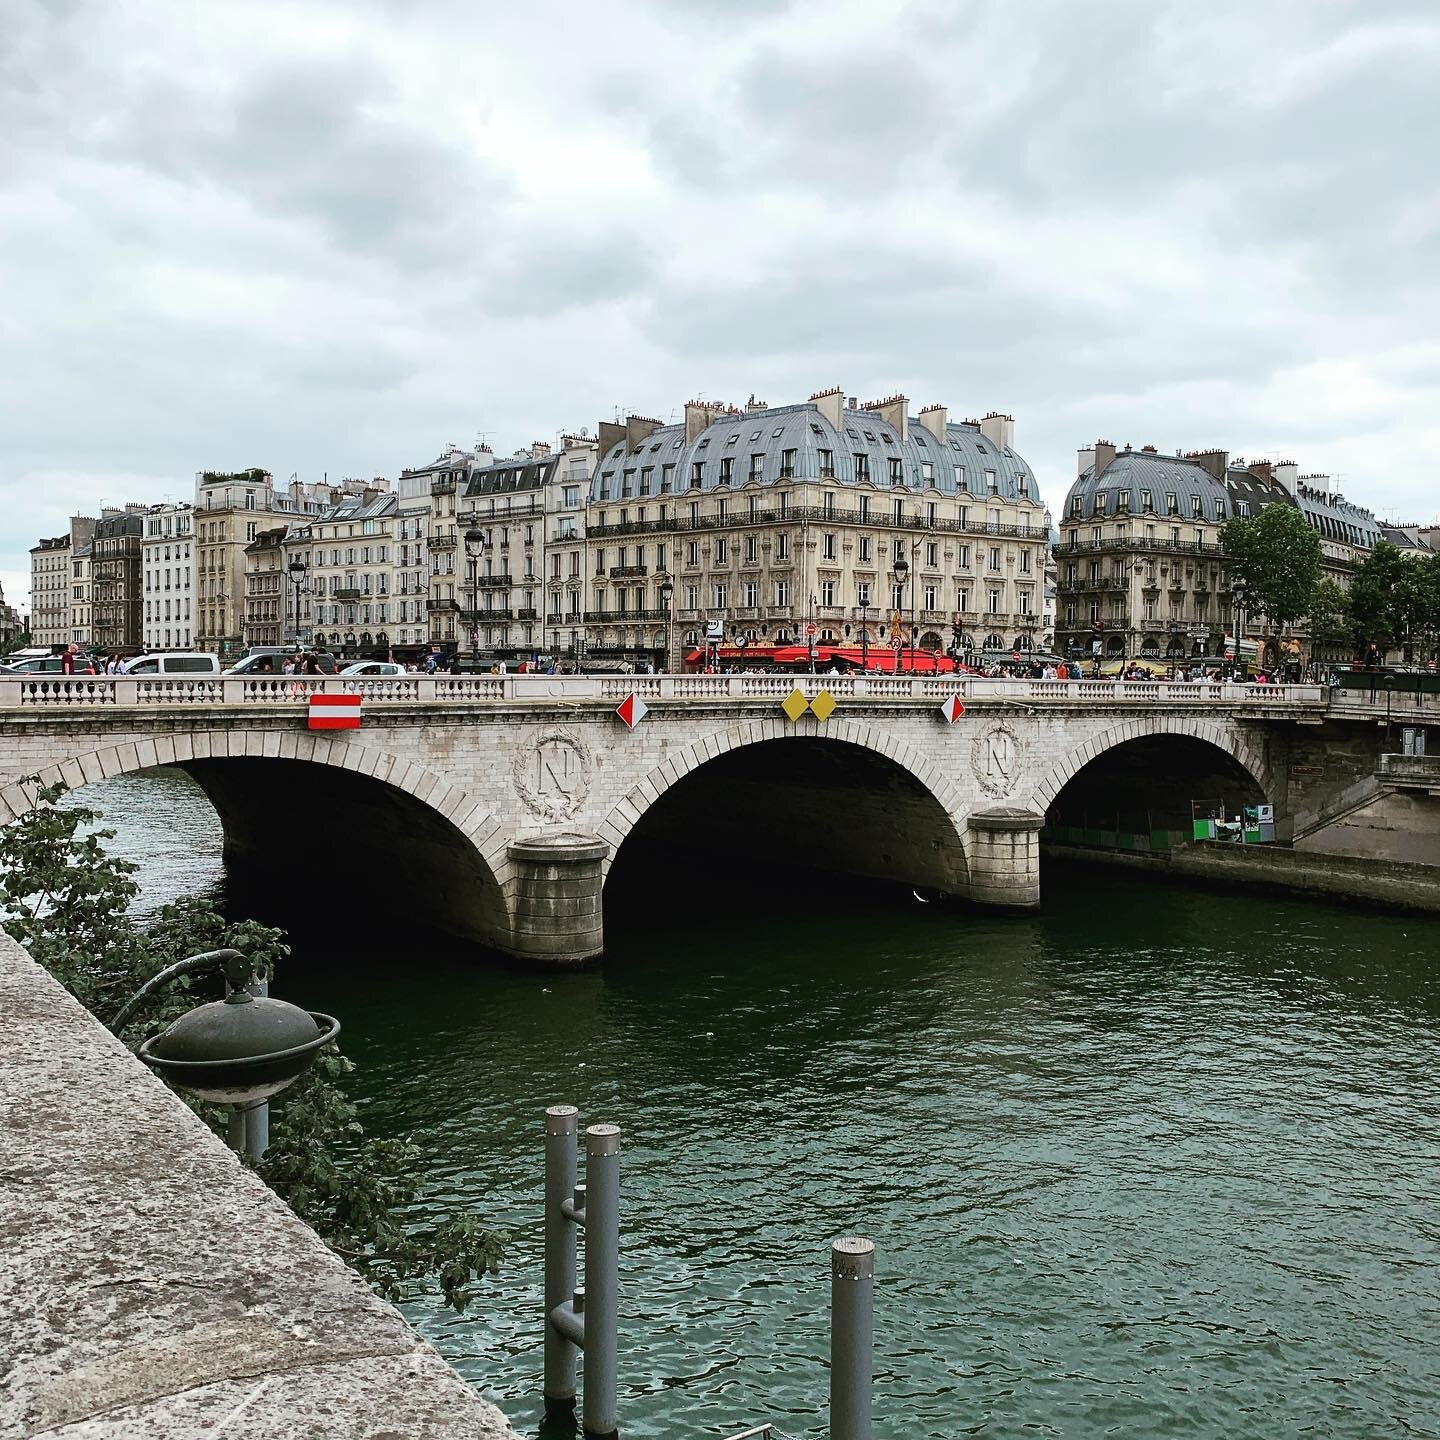 &ldquo;All Parisians know instances of serenity and grace: crossing the Seine and looking to the left and the right and saying to themselves, &lsquo;Ooh La!&rsquo;&rdquo;&nbsp;
-- Cedric Klapisch, filmmaker

.
.
.
.
.

#theriverthatmadeparis #seine #